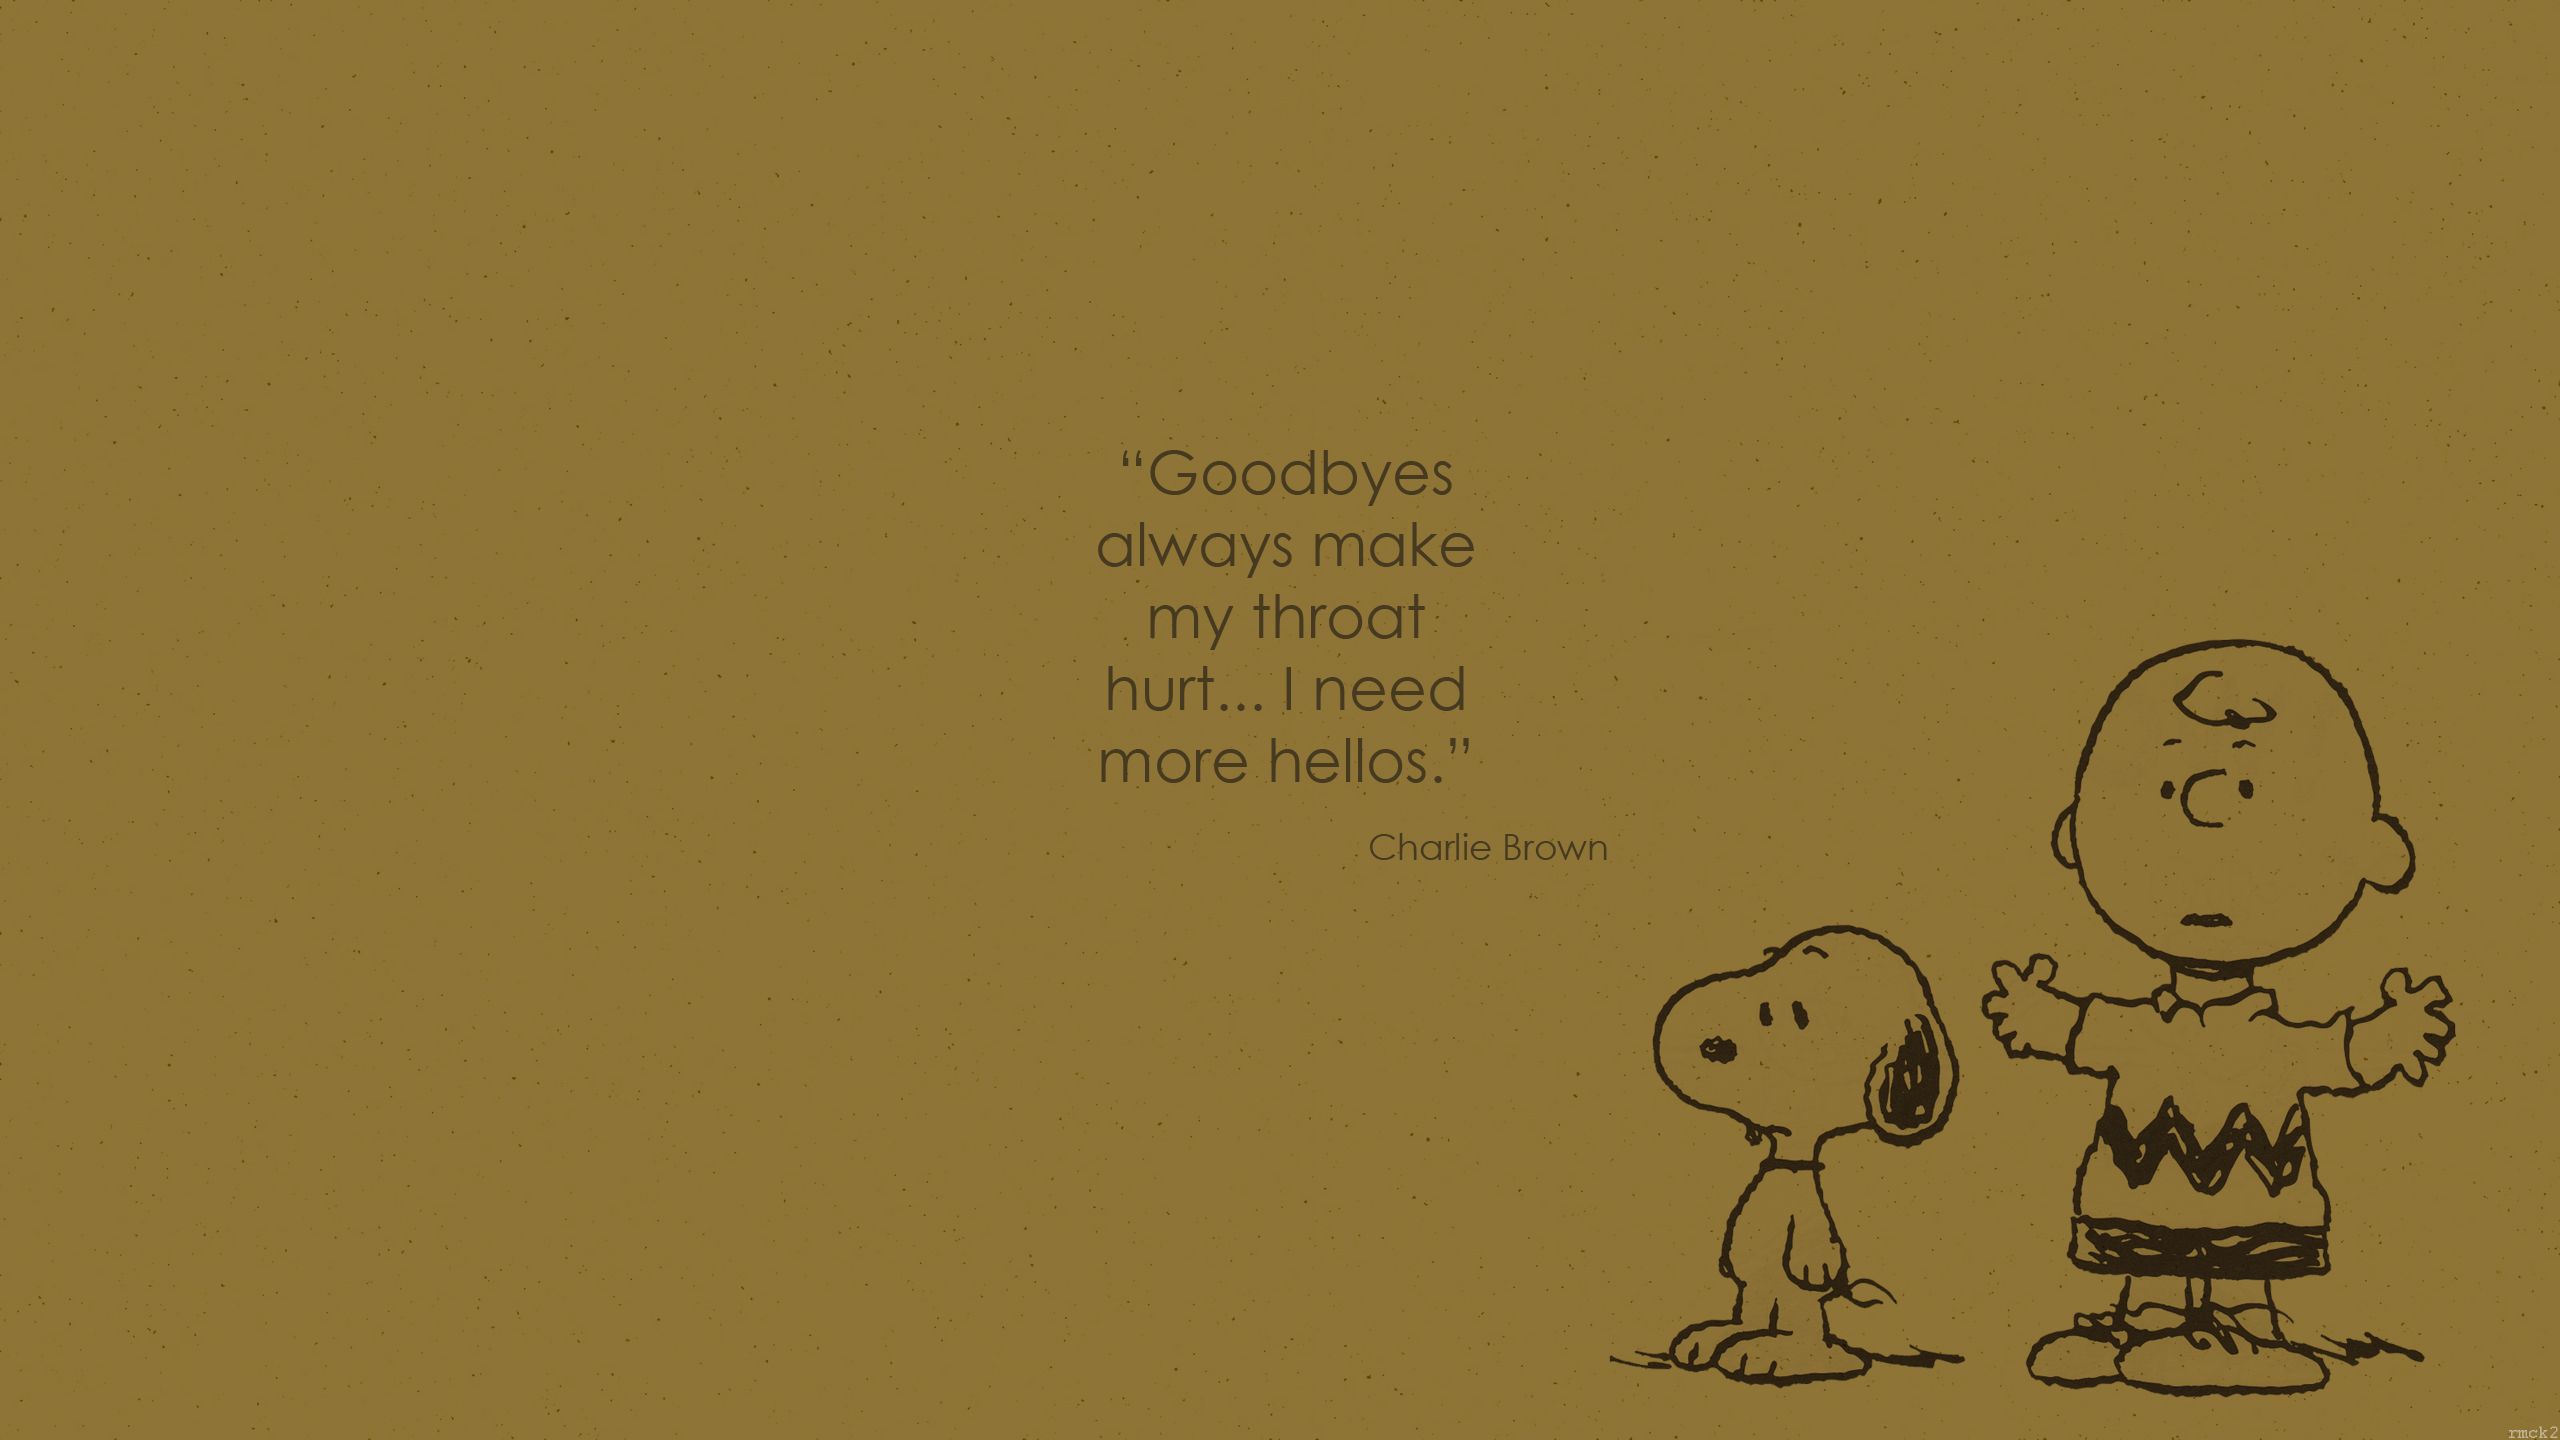 Wallpaper Charlie Brown quote 1 by rmck2 on DeviantArt